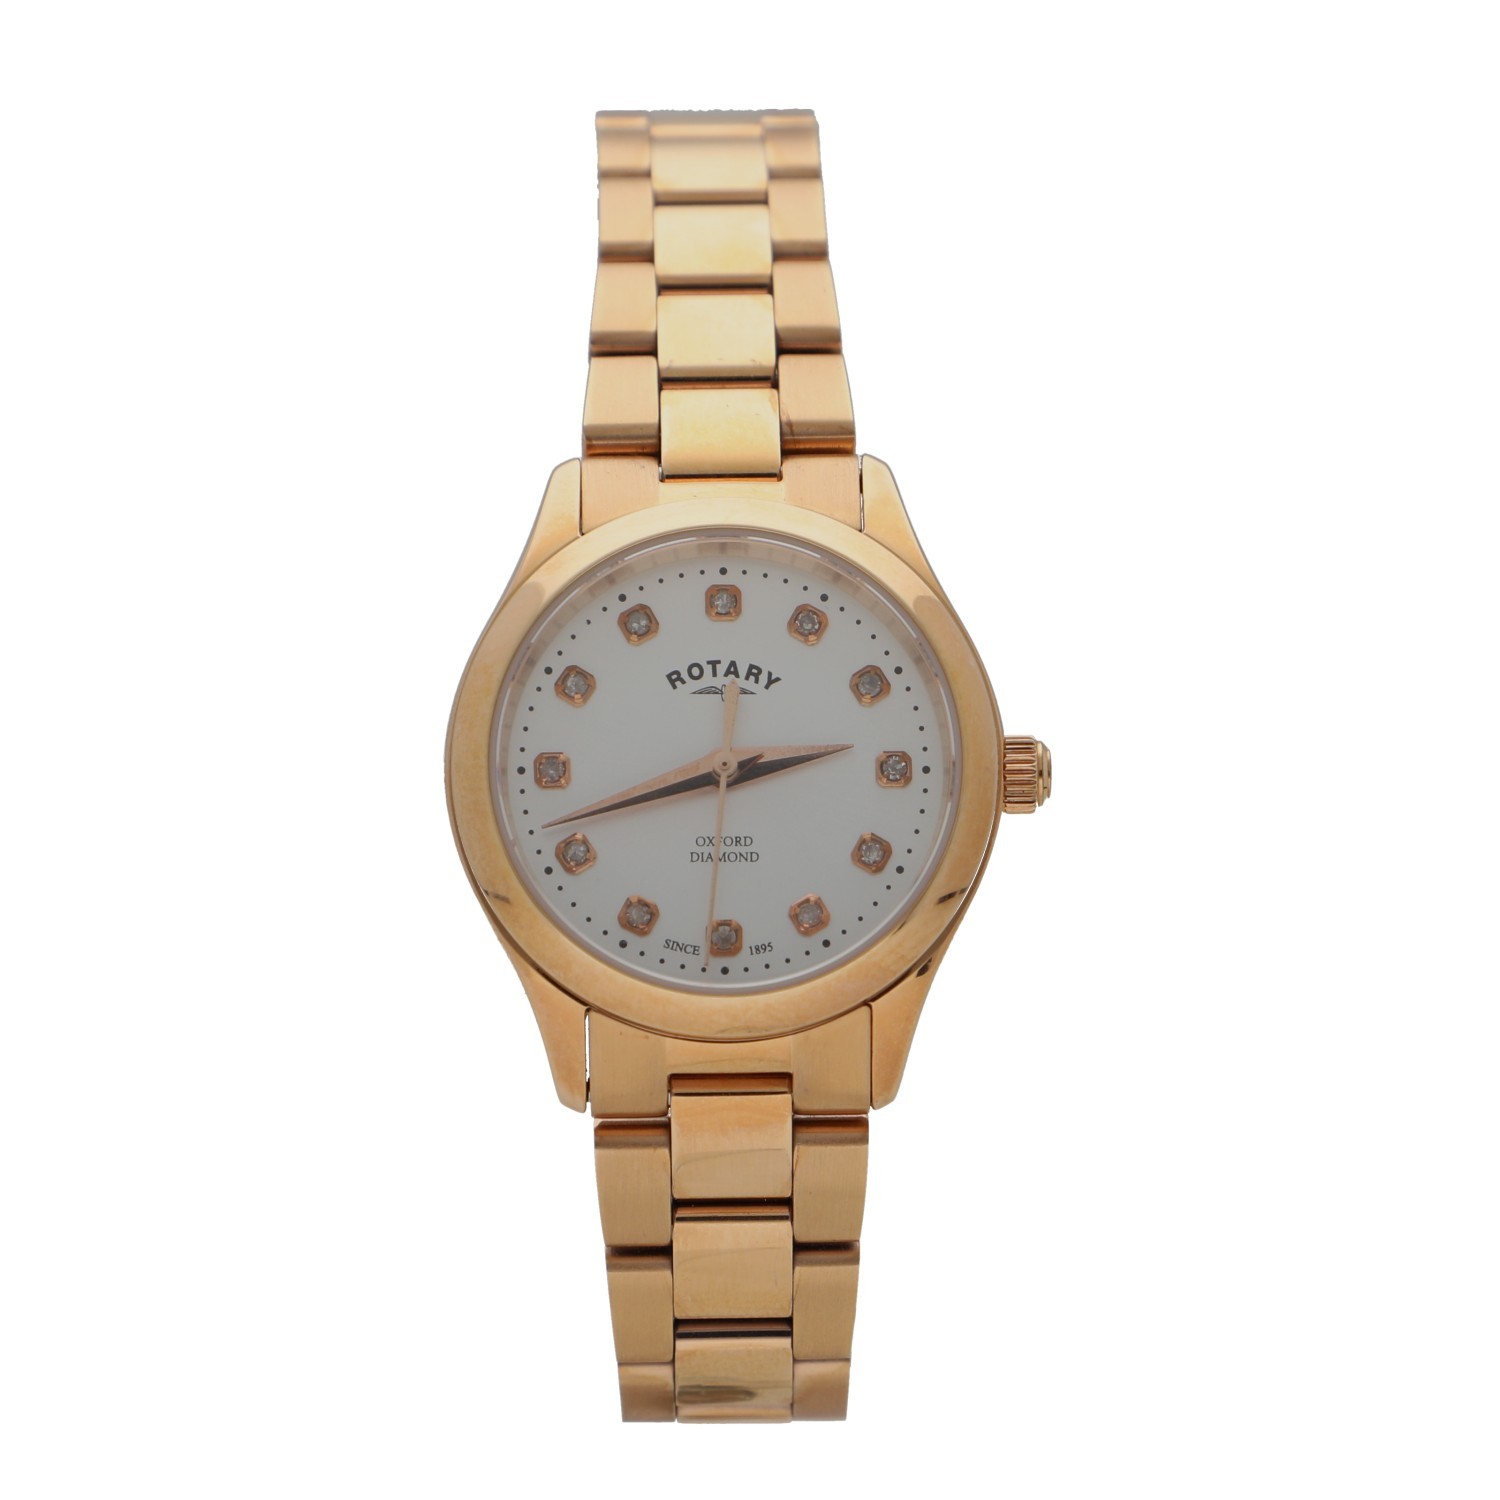 Rotary Oxford Diamond rose gold plated lady's wristwatch, 28mm